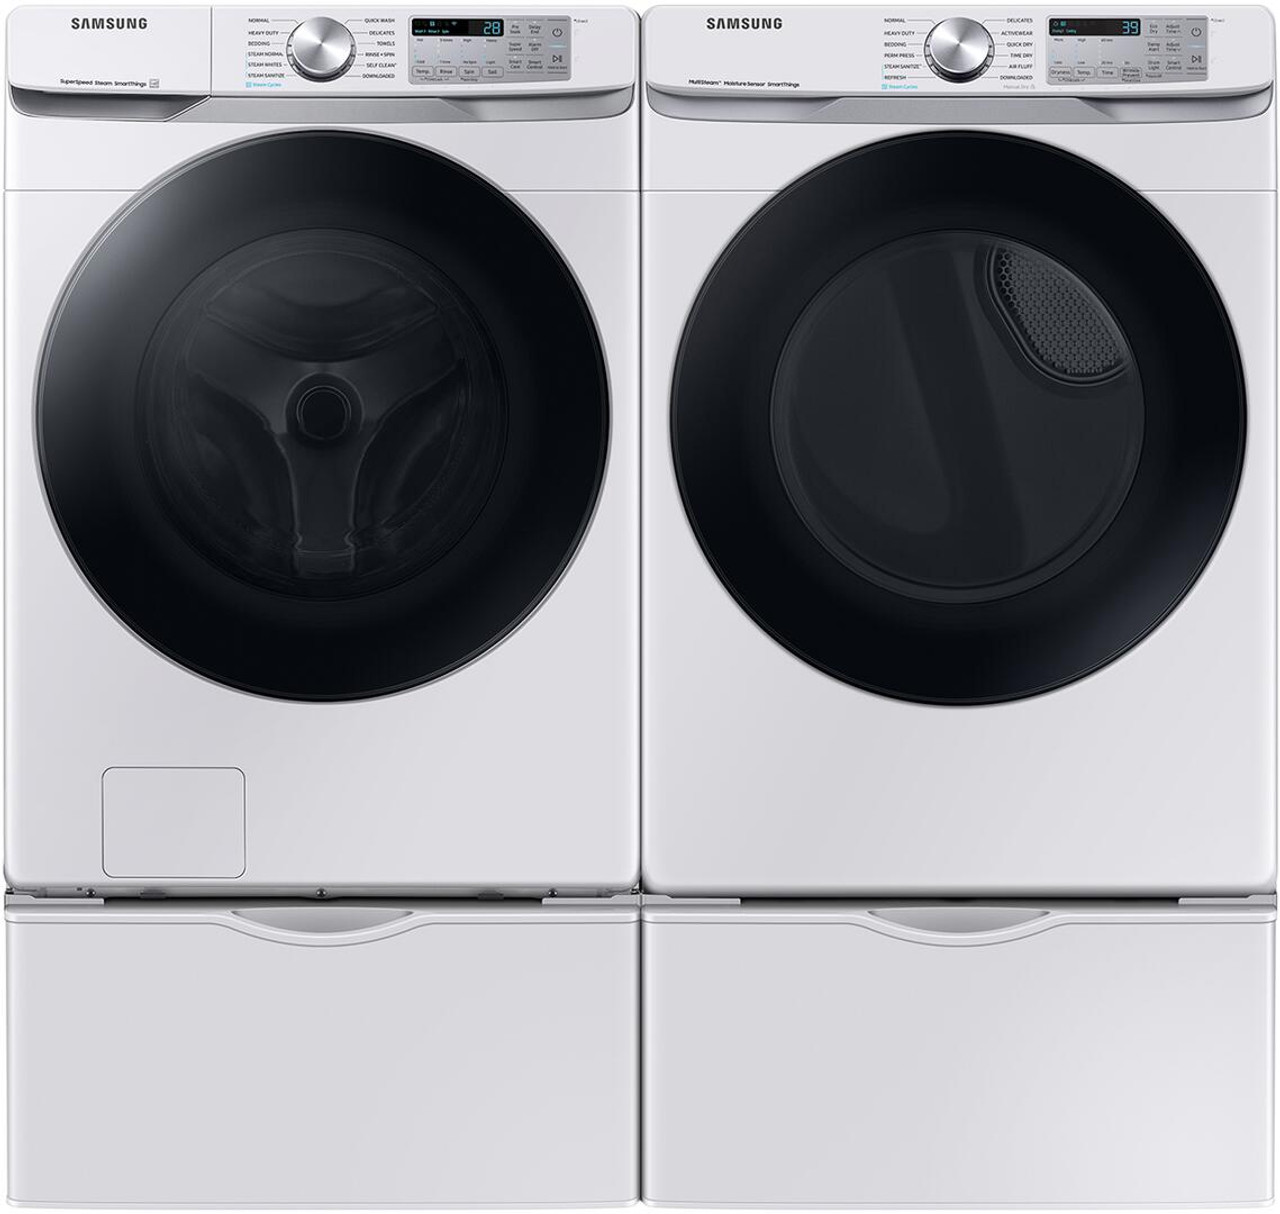 How To Fix The Error Code F23 For Whirlpool Washer